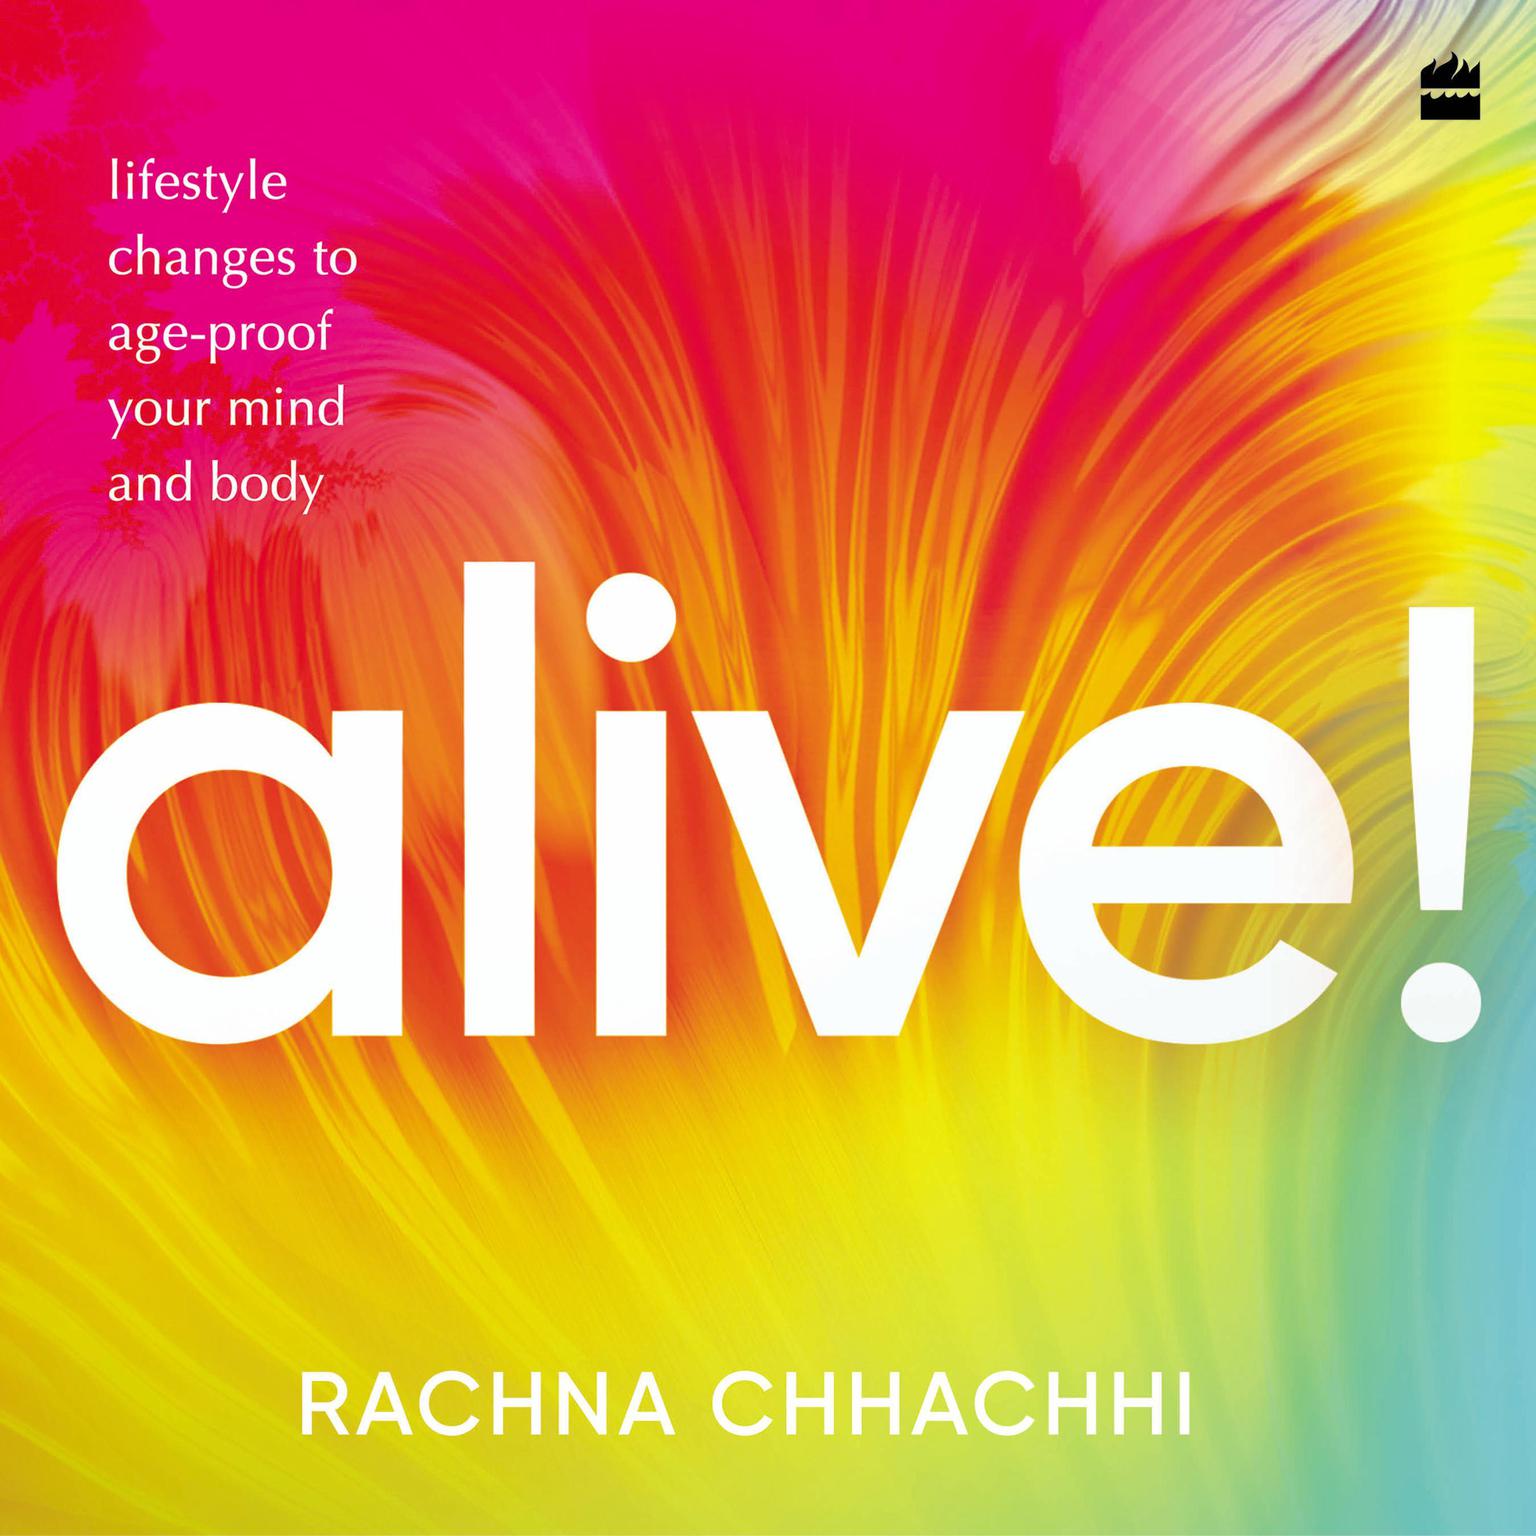 ALIVE! Lifestyle Changes to Age-Proof Your Mind and Body Audiobook, by Rachna Chhachhi